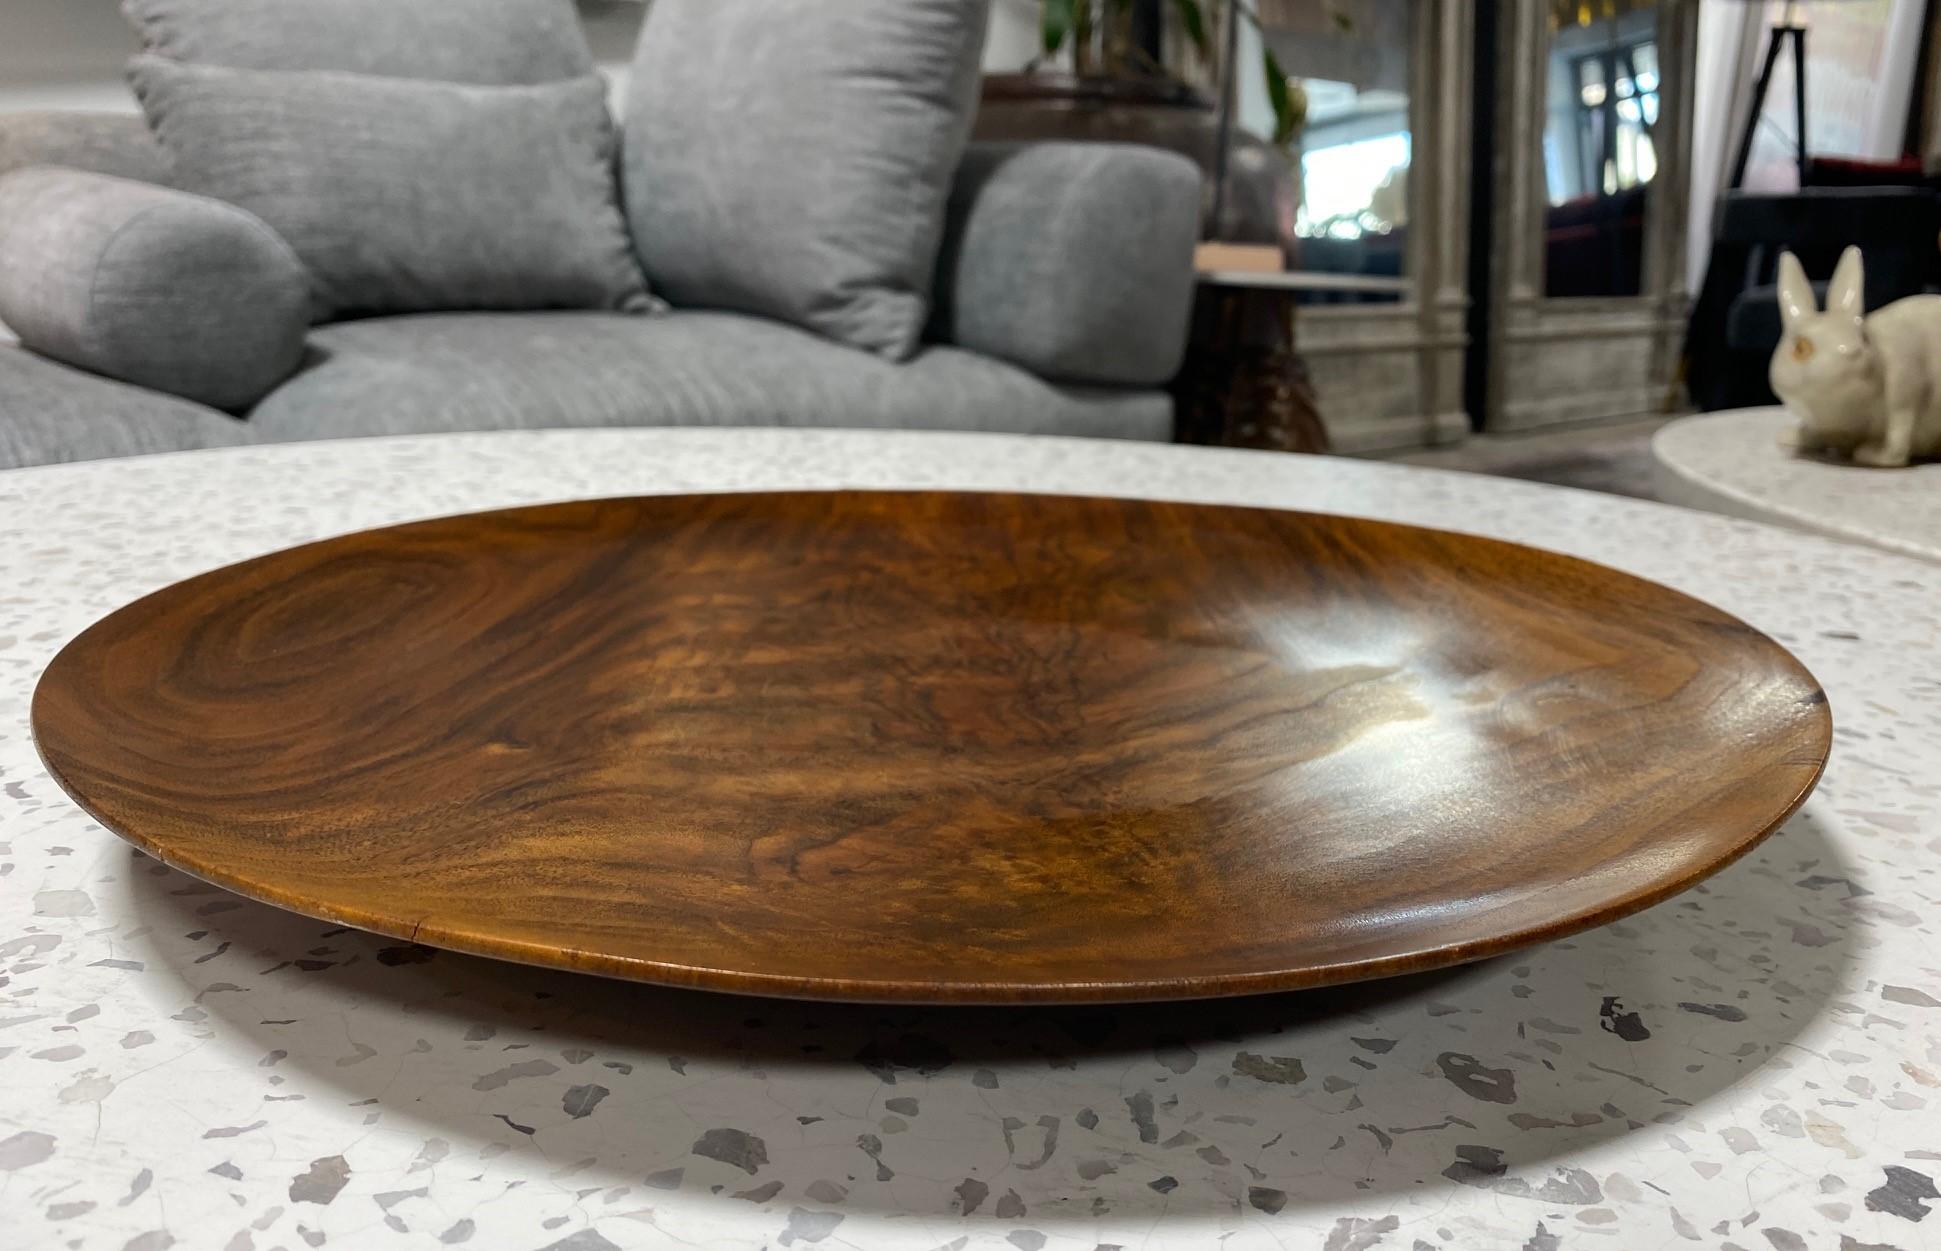 Bob Stocksdale Signed Mid-Century Modern Turned Walnut Wood Charger Platter For Sale 5